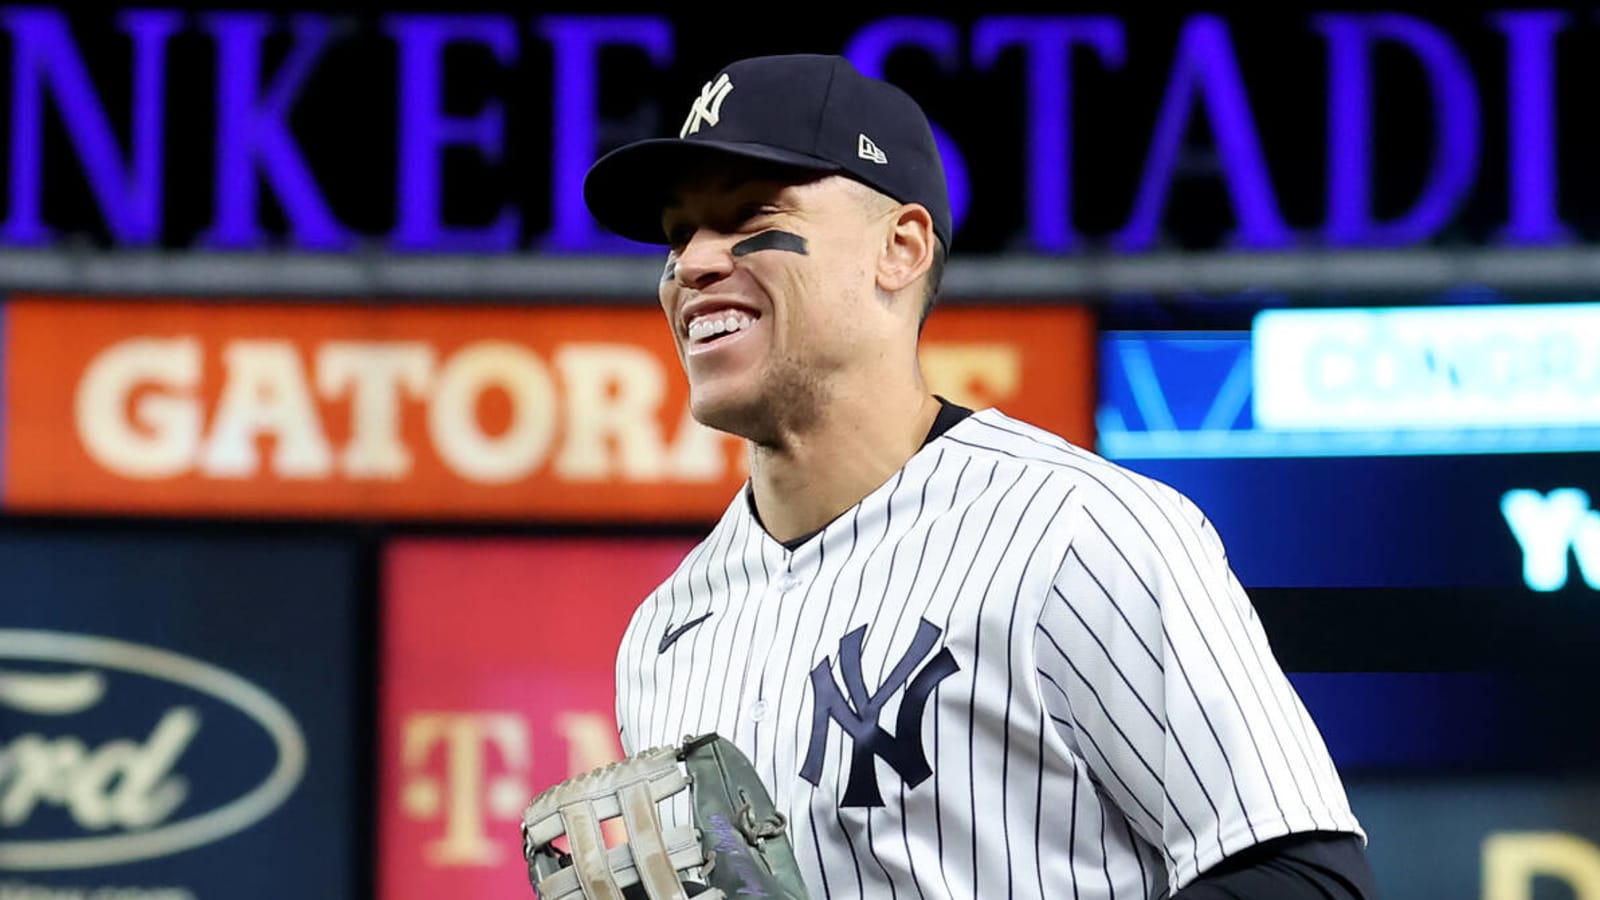 Aaron Boone: Aaron Judge not reaching 62 HRs wouldn't 'put a damper' on season